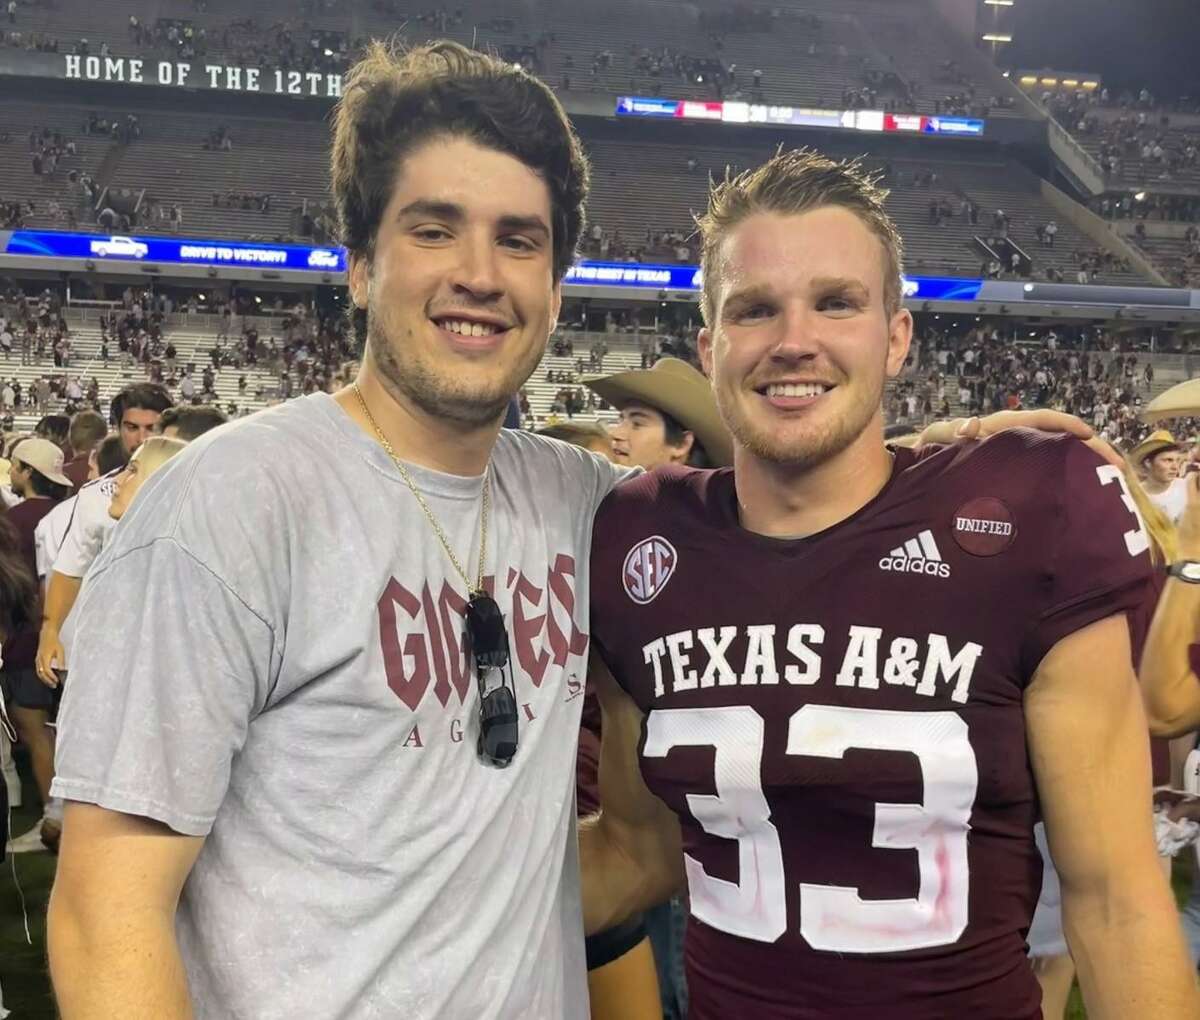 Stavros Karamitsos, left, says Sam Mathews’ friends urged him to try out at A&M, saying, “You could be out there — that could be you!”